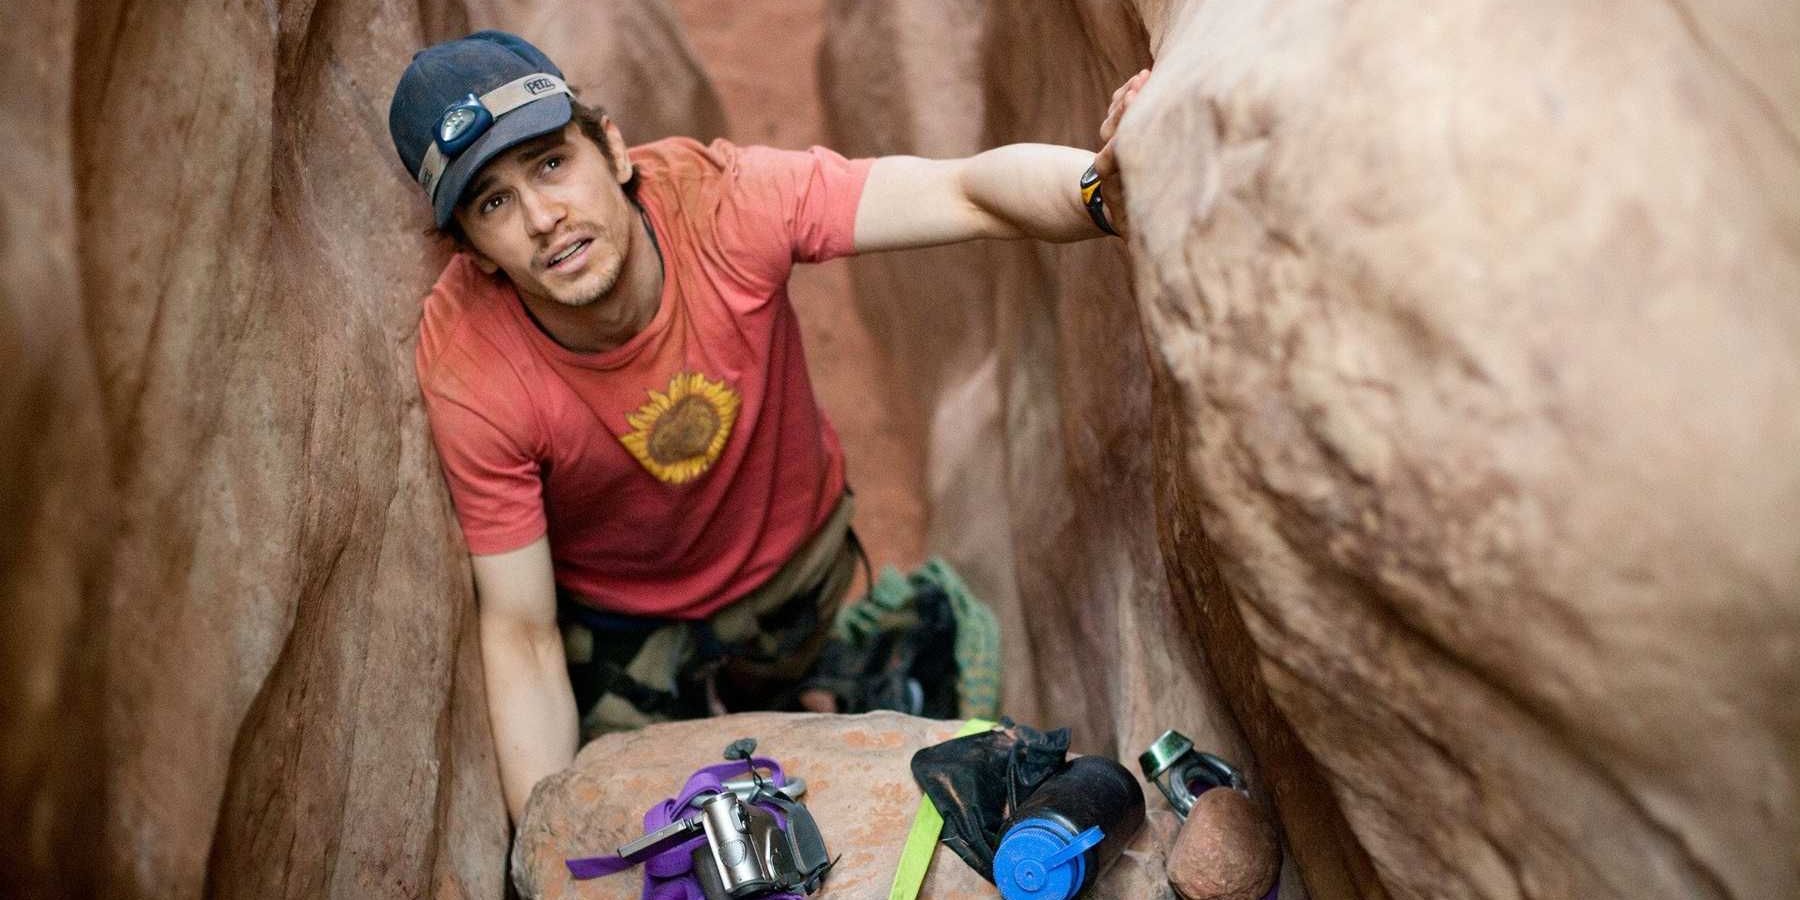 Man trapped between boulders in 127 Hours